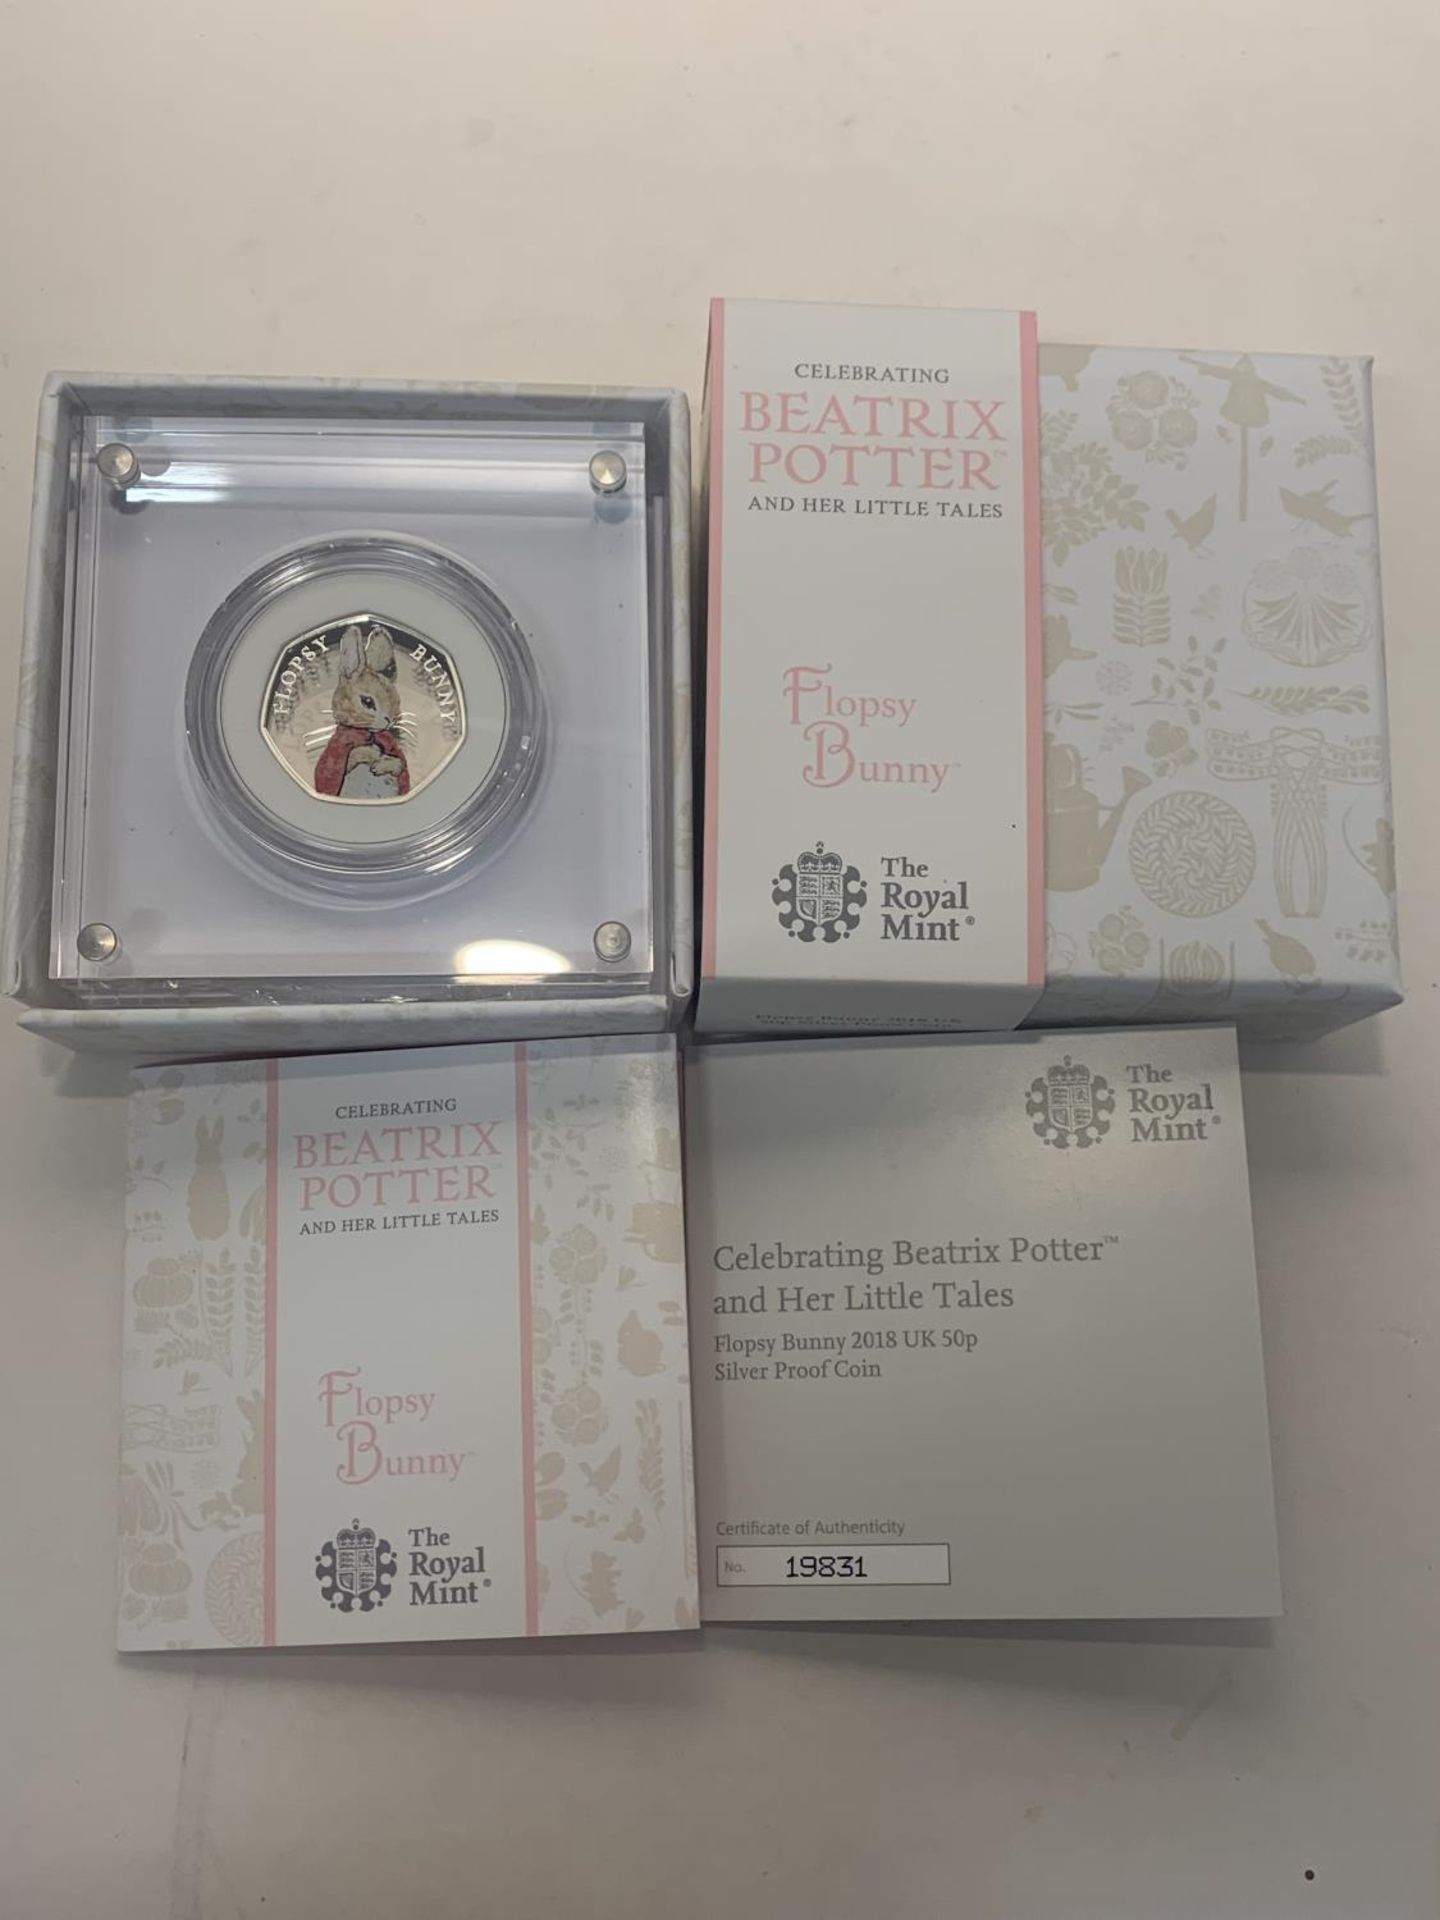 A UK 2018 BEATRIX POTTER FLOPSY BUNNY 50P SILVER PROOF COIN WITH CERTIFICATE OF AUTHENTICITY